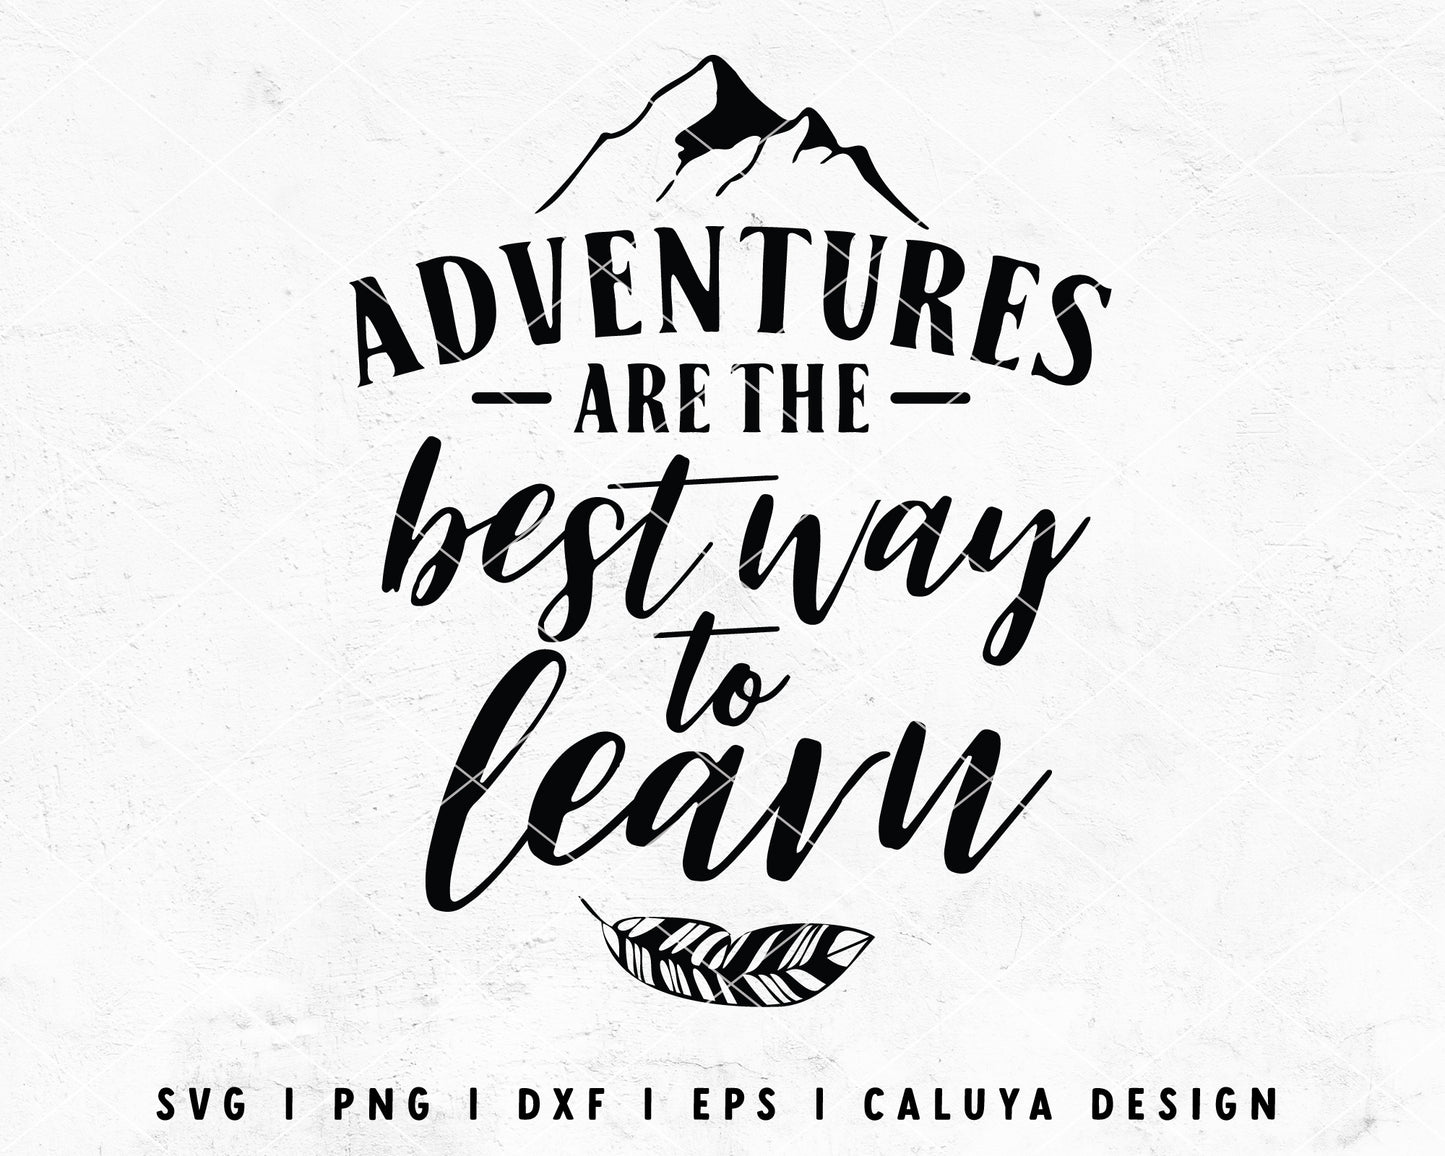 My Adventure Book SVG, Our Adventure Book SVG, up SVG, Adventure Photo  Album, Svg Png Jpg Dxf Eps Cricut Silhouette Cutting Files -  Norway